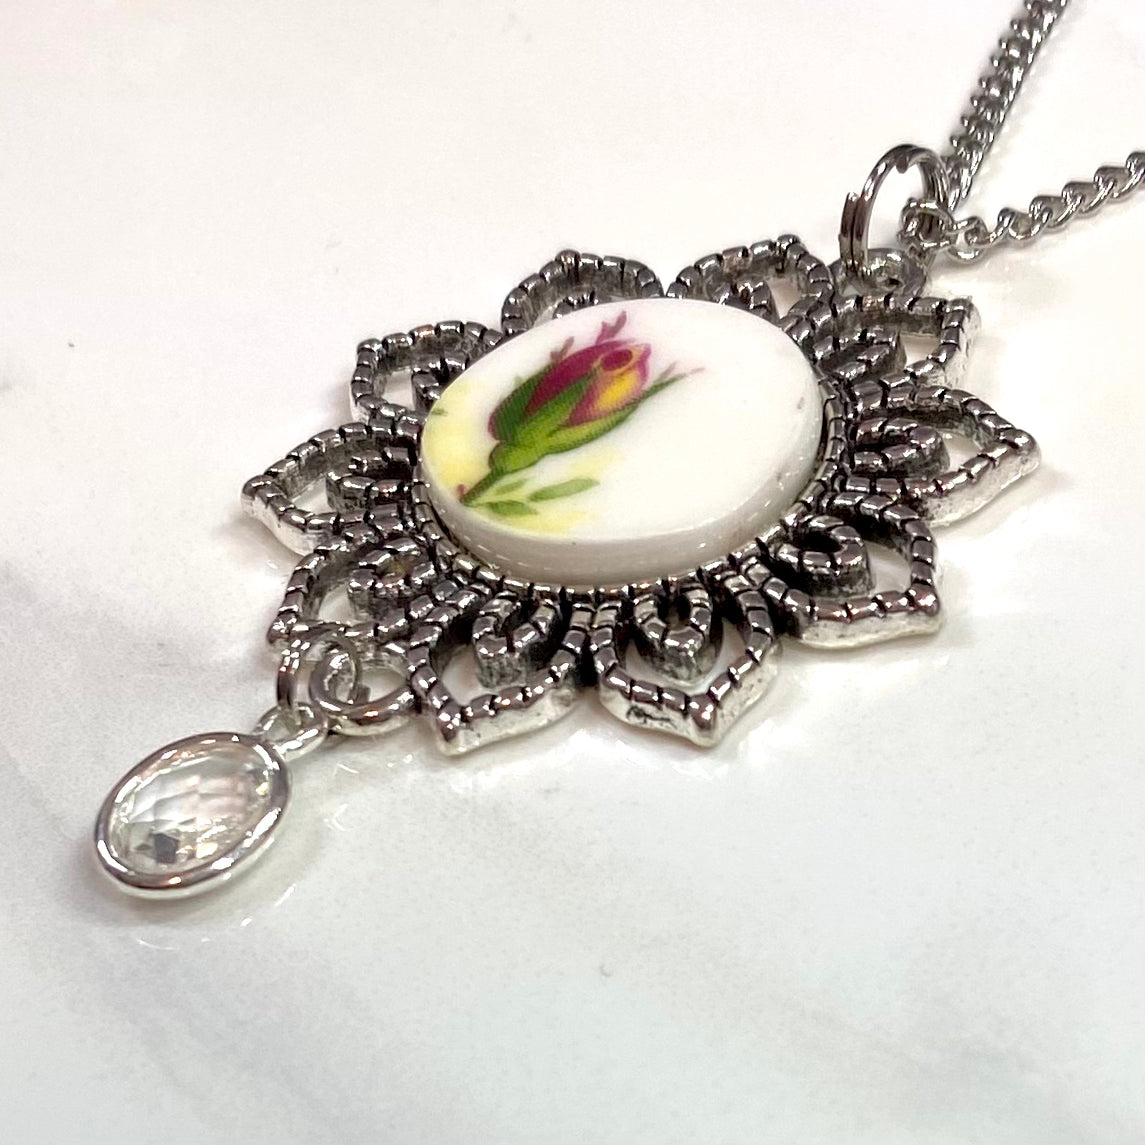 1962 Royal Albert ‘Old Country Roses’ Pendant Necklace